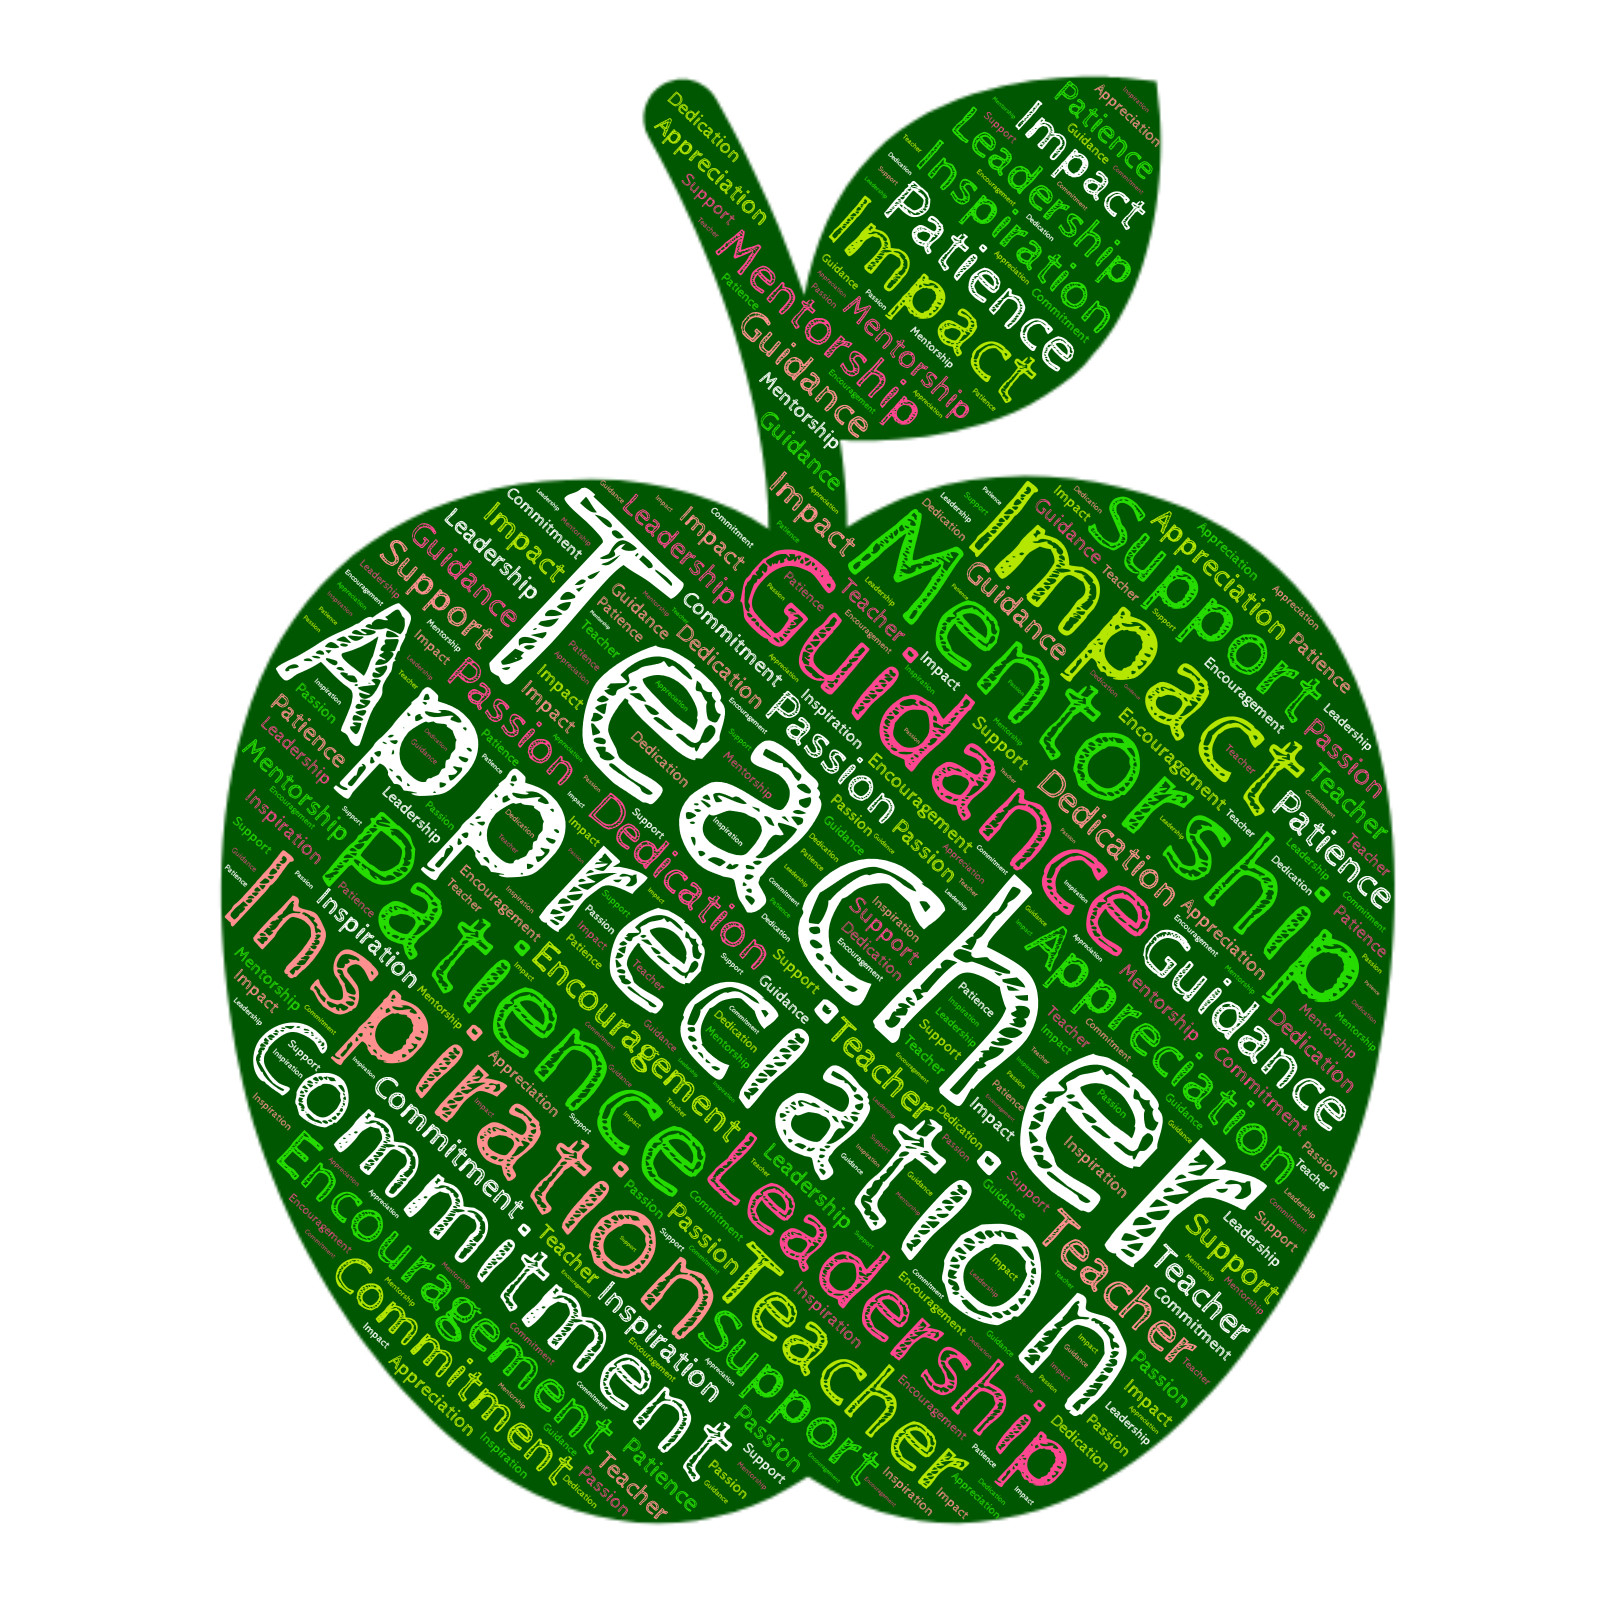 This Presentation Clipart shows a preview of Teacher Appreciation Wordcloud